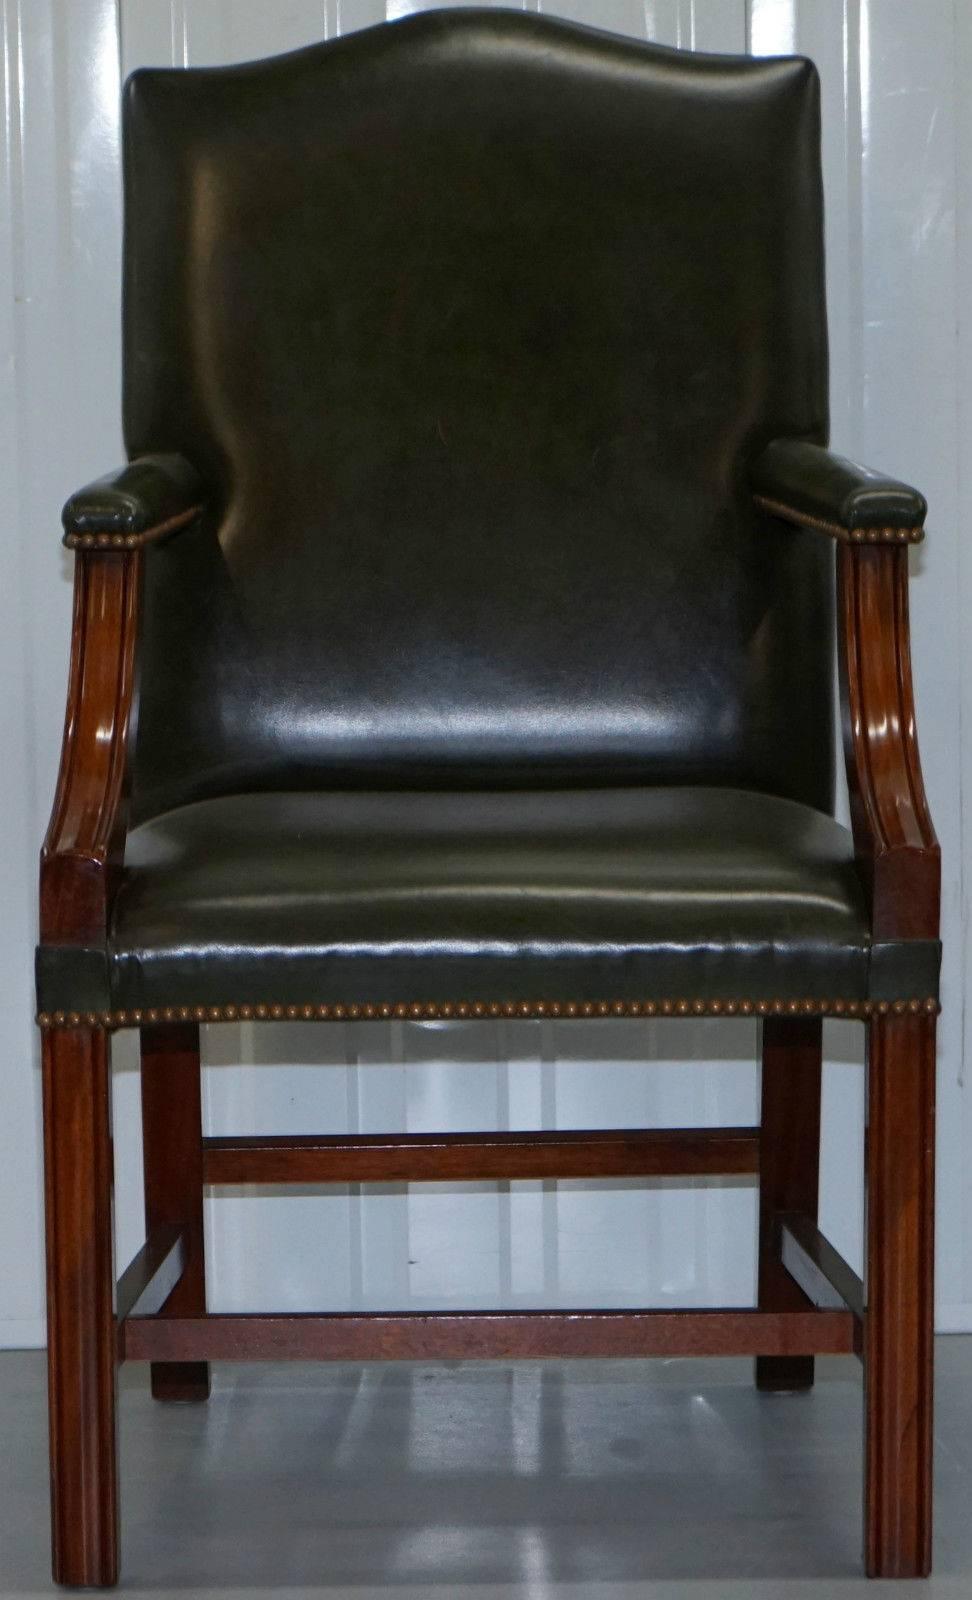 British Pair of Frank Hudson & Son Ltd Chesterfield Aged Green Leather Carver Armchairs